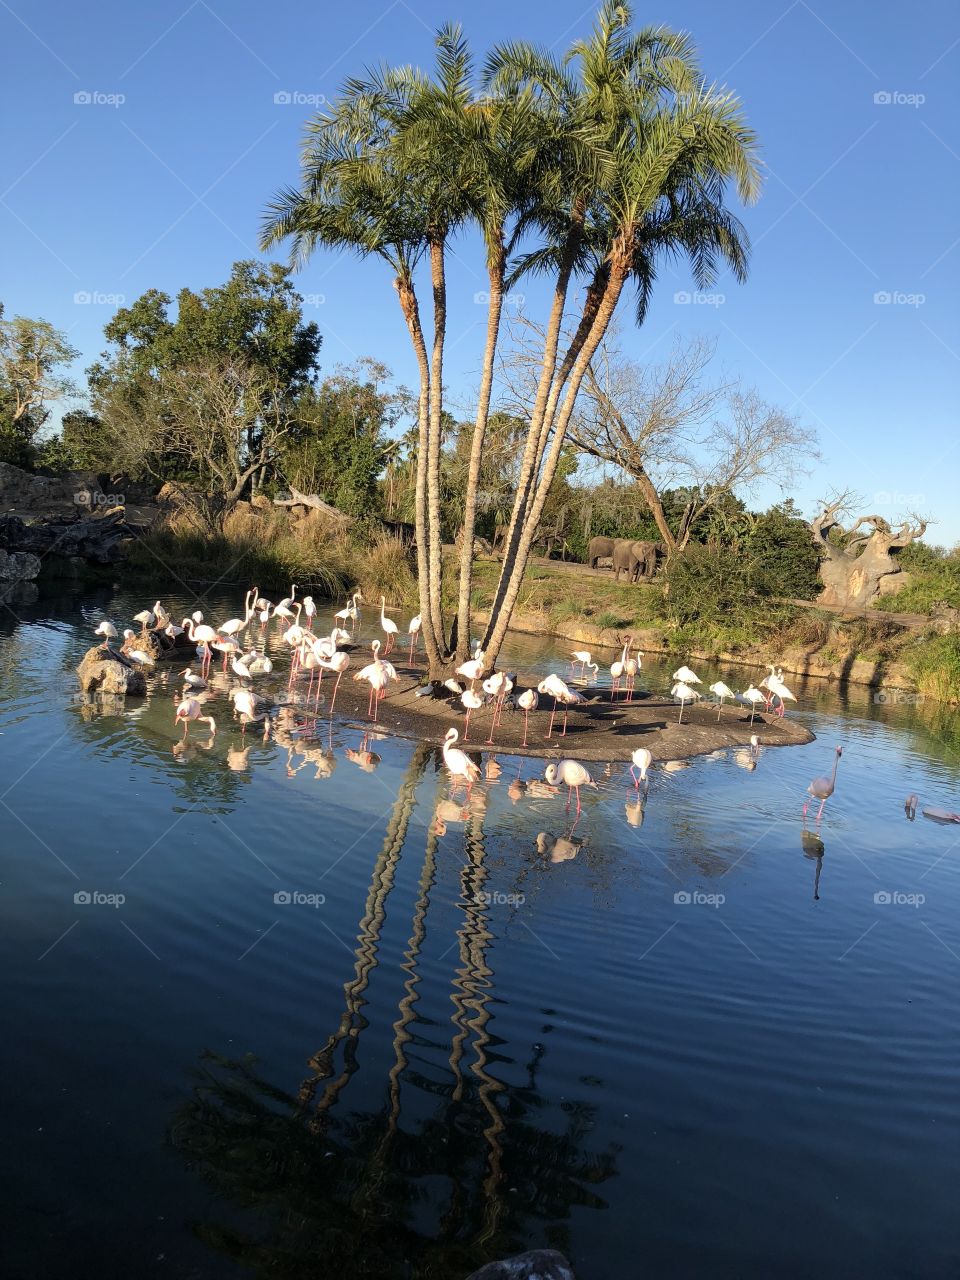 Flamingos surrounding a reflective pool of water 